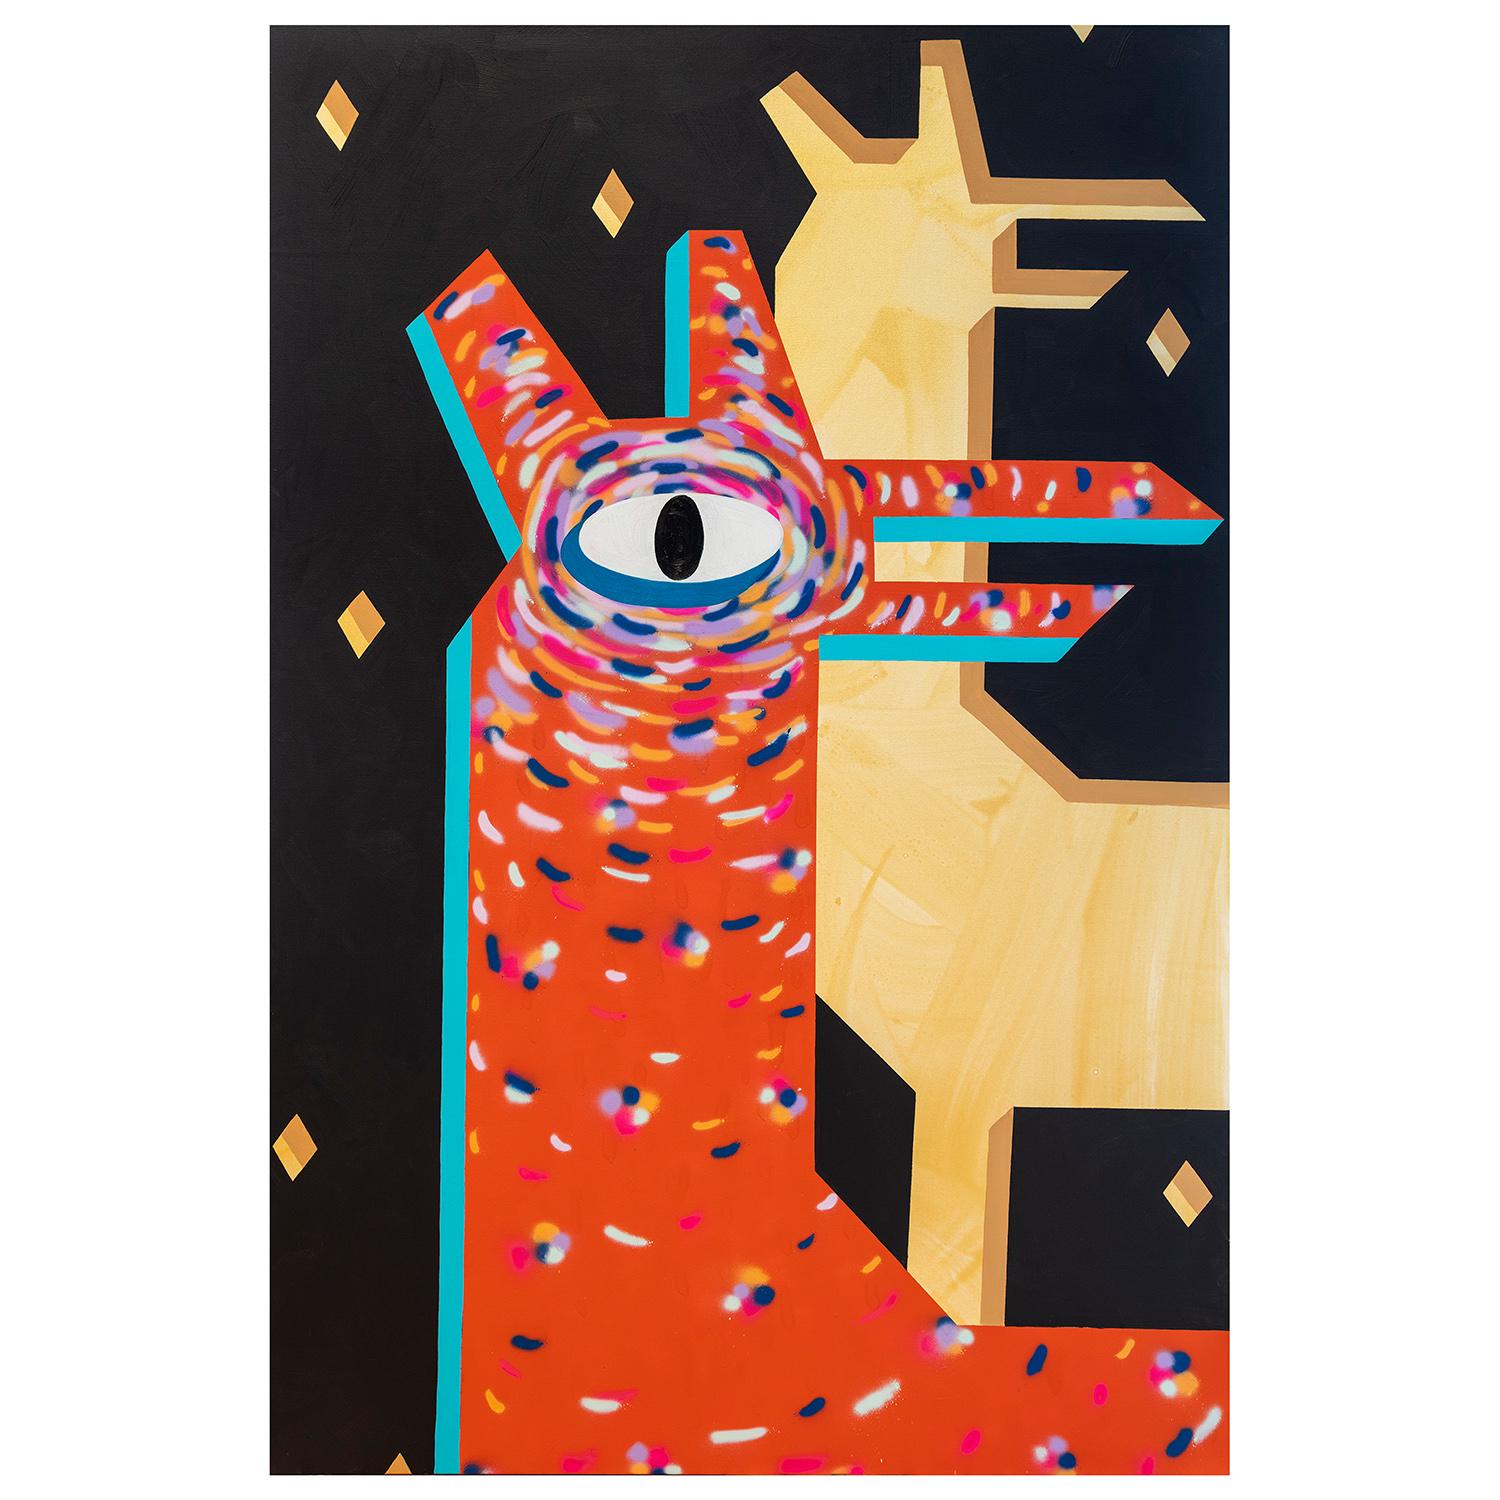 Cecilia Beaven Animal Painting - "Night Deer" Massive Abstract Orange Toned Contemporary Geometric Deer Painting